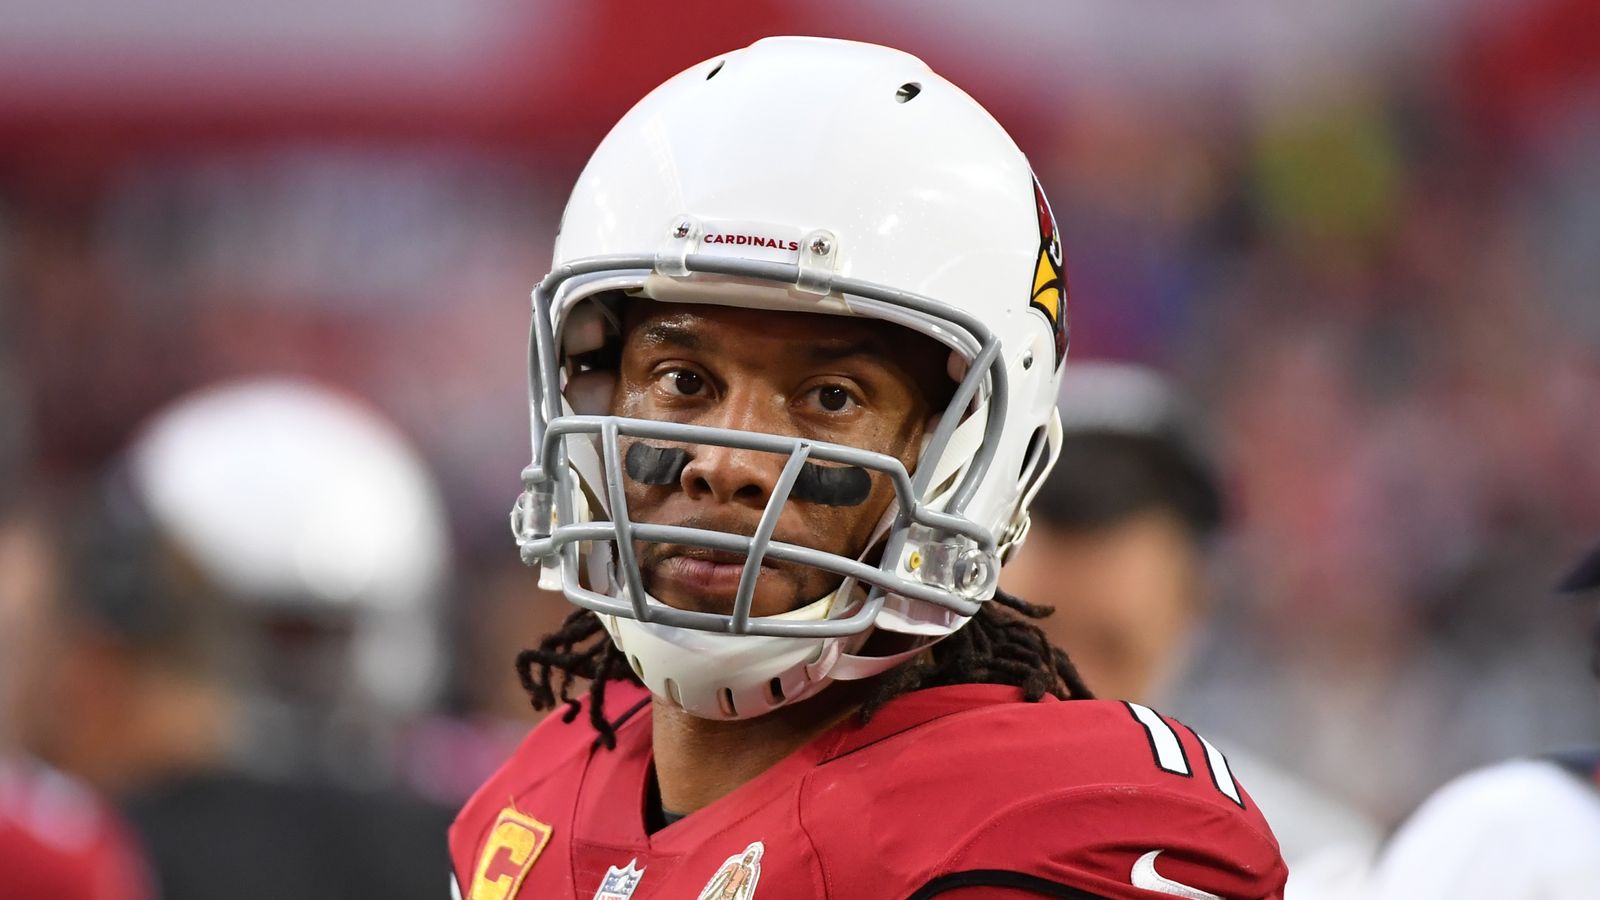 Arizona Cardinals' Larry Fitzgerald makes a catch during the teams